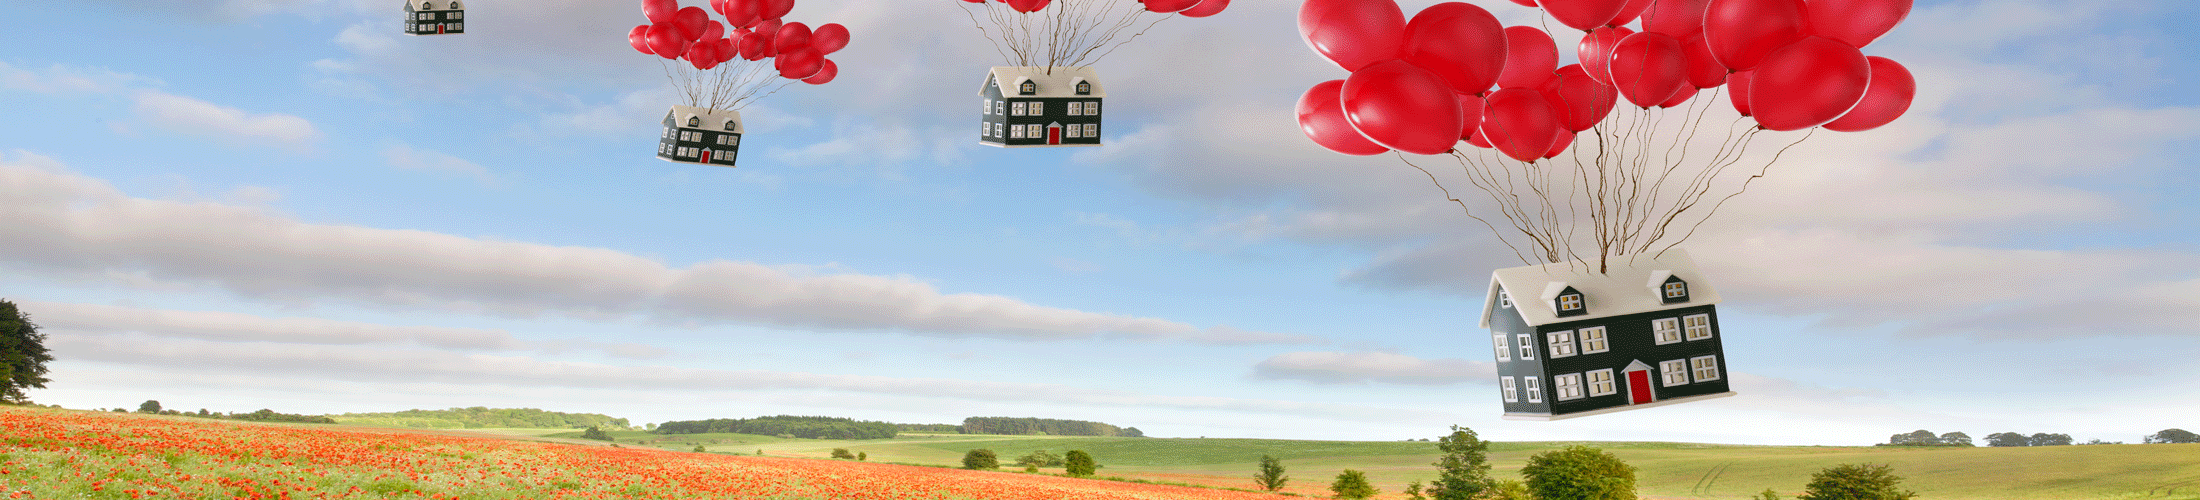 Houses floating balloons field